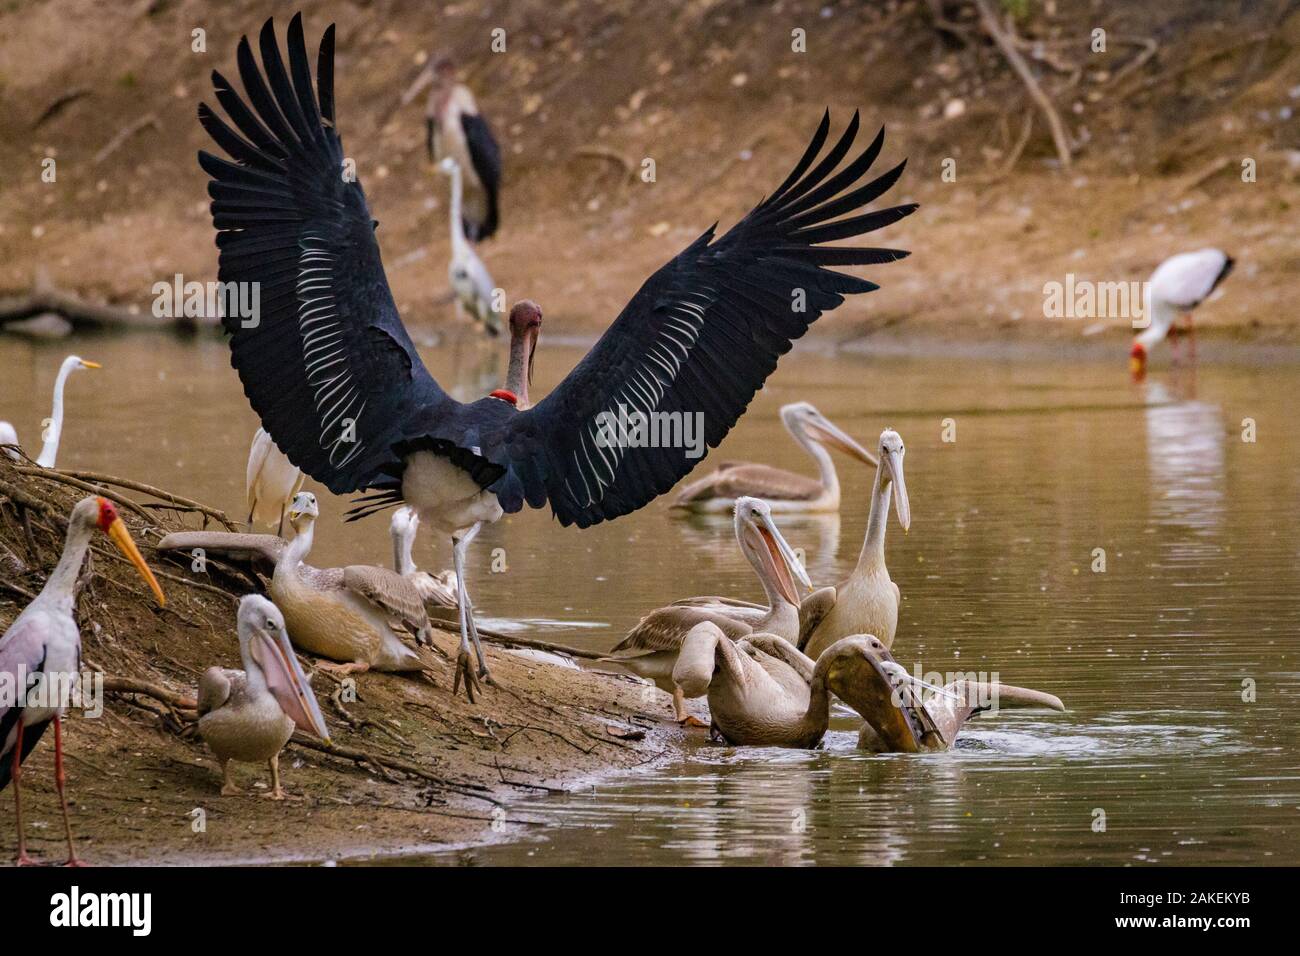 Birds squabbling over fish in the Msicadzi River. Pink-backed pelican (Pelecanus rufescens) biting at the head of another pelican with a pouch full of fish while a marabou stork (Leptoptilos crumenifer) also arrives. Great egrets (Ardea alba), yellow-billed storks (Mycteria ibis), and grey herons (Ardea cinerea) stand nearby. Msicadzi River, Gorongosa National Park, Mozambique. During the  dry season many water sources dry up trapping fish in smaller areas. Many birds and crocodiles gather to feed on this  abundant food source. Stock Photo